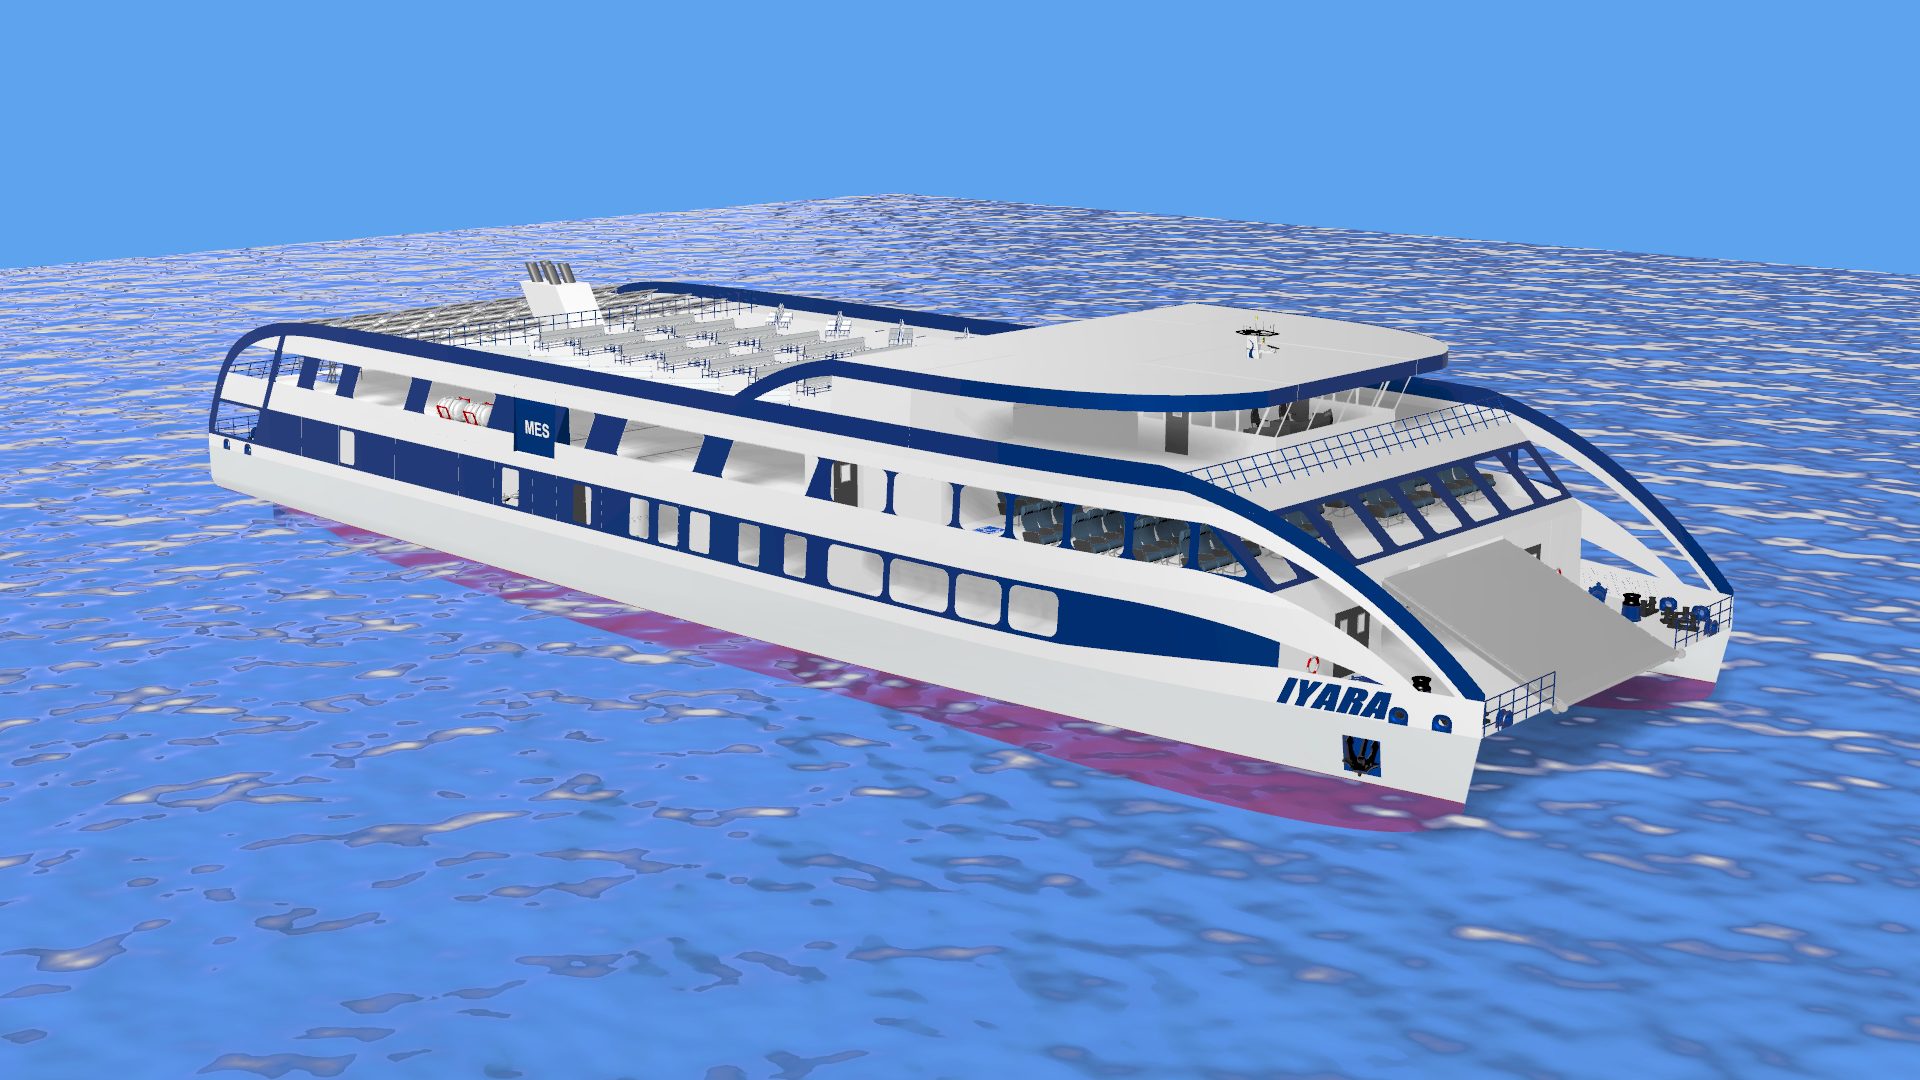 Results of 8th Worldwide Ferry Safety Association International Student Design Competition